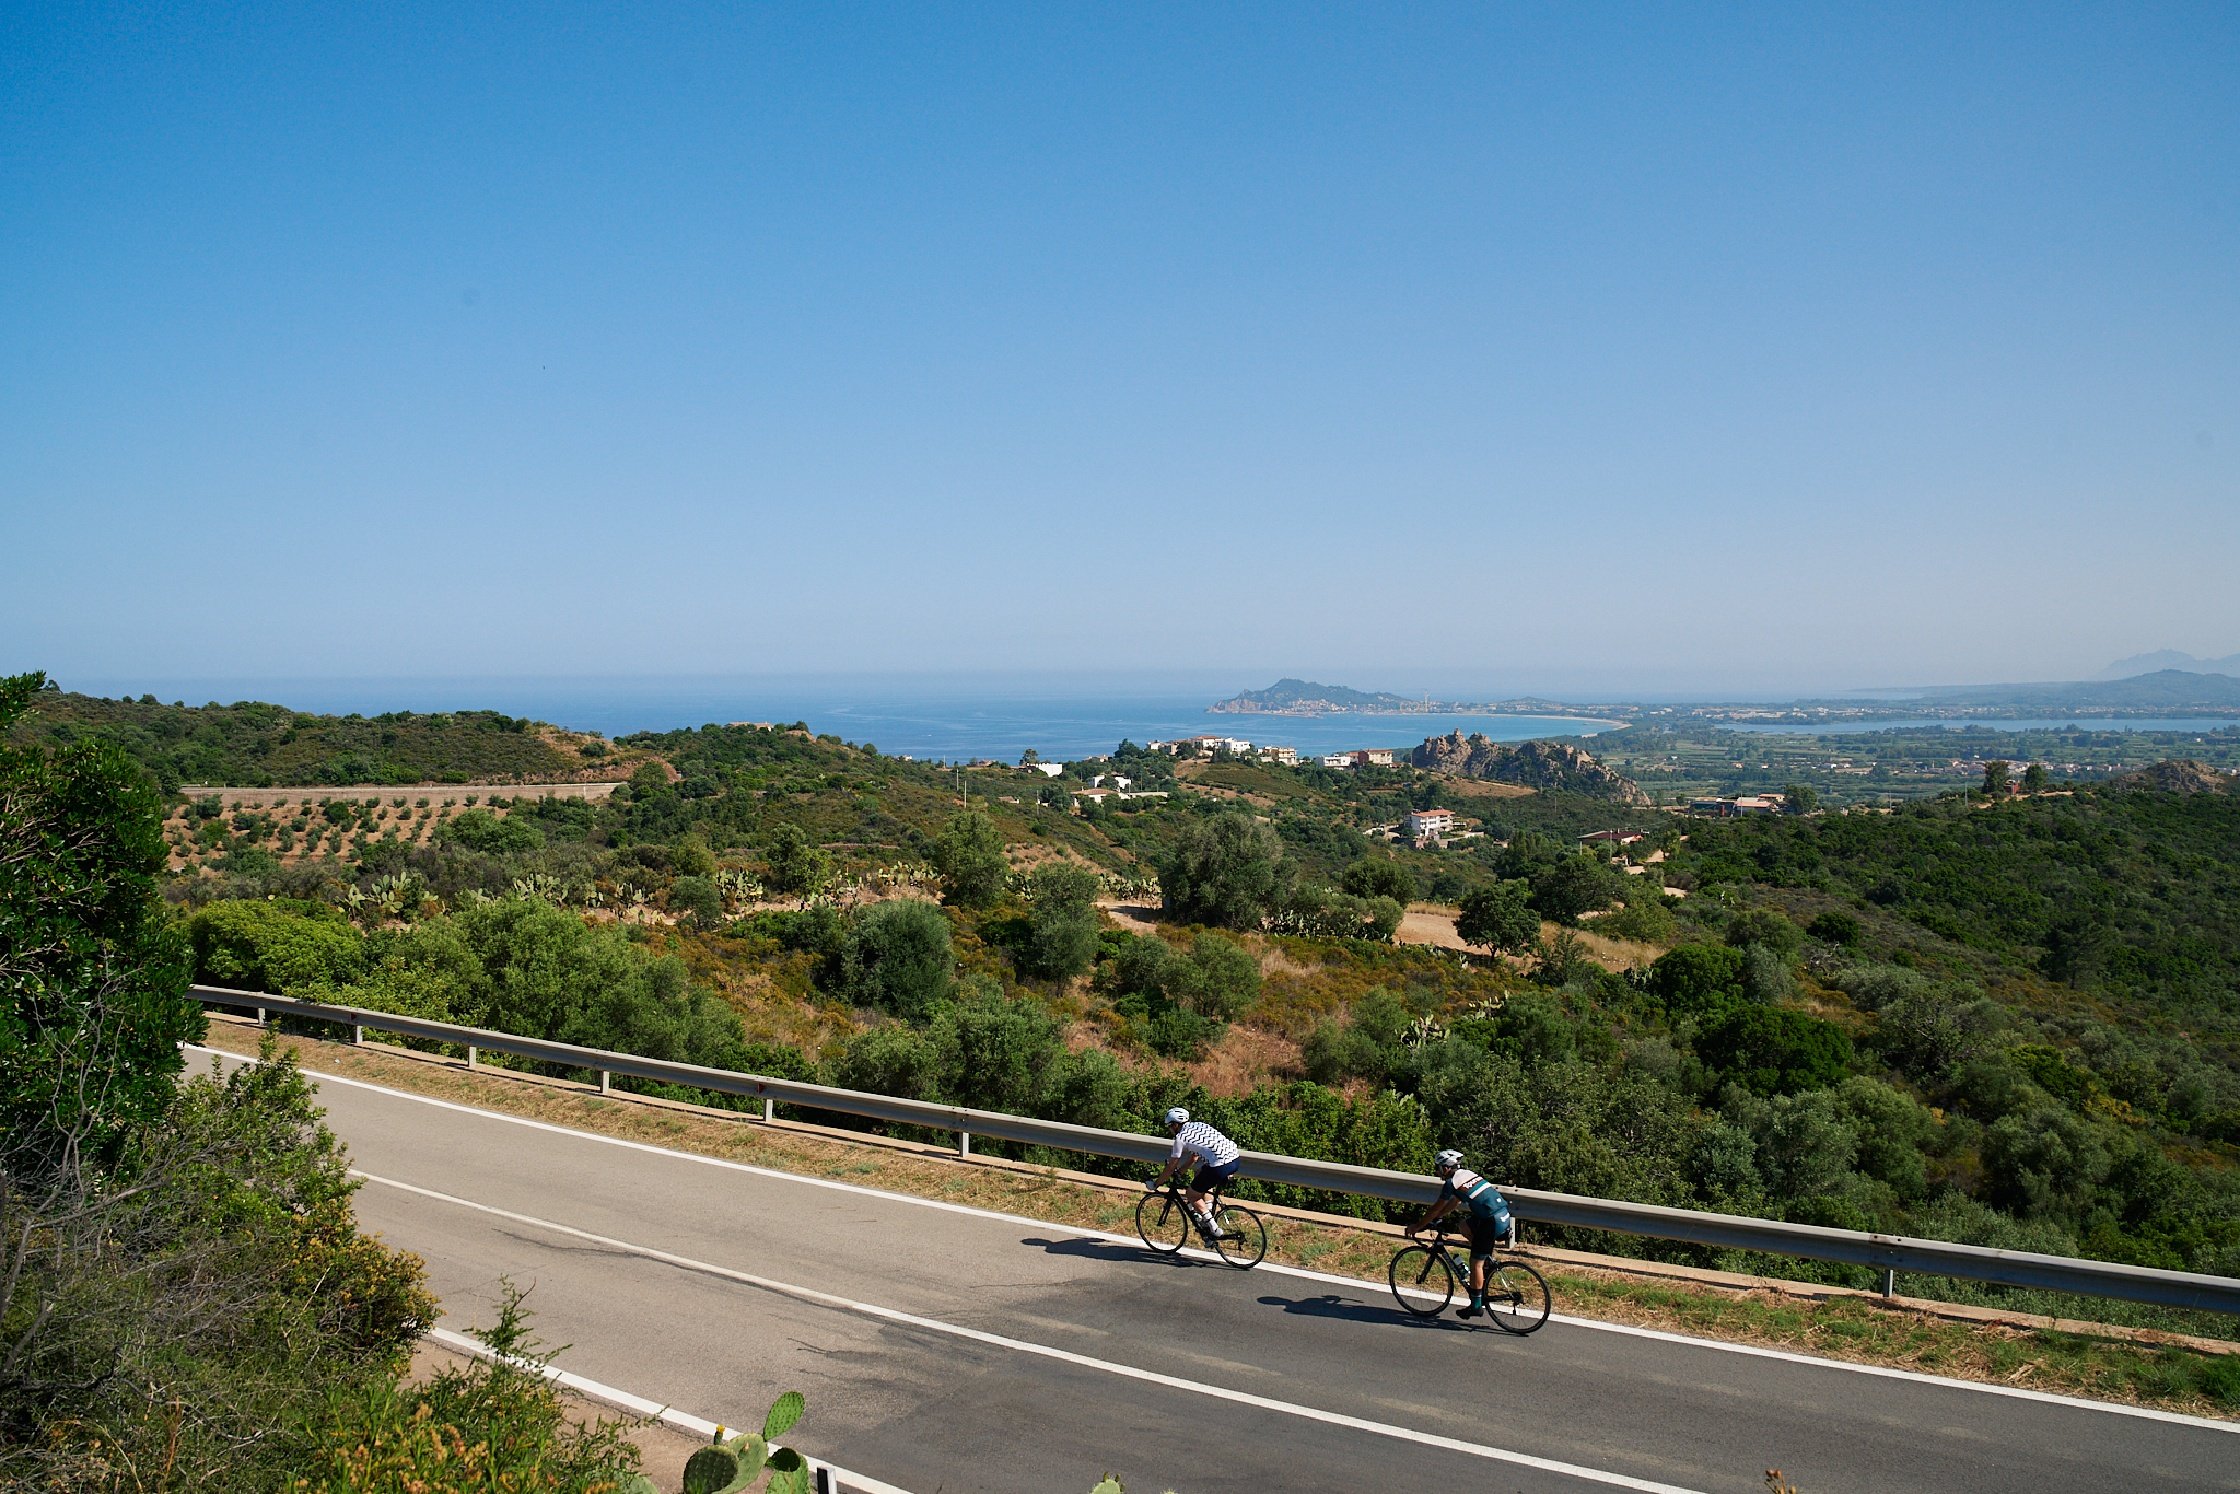 Sardinia Chef Bike Tour in the Daily Mail